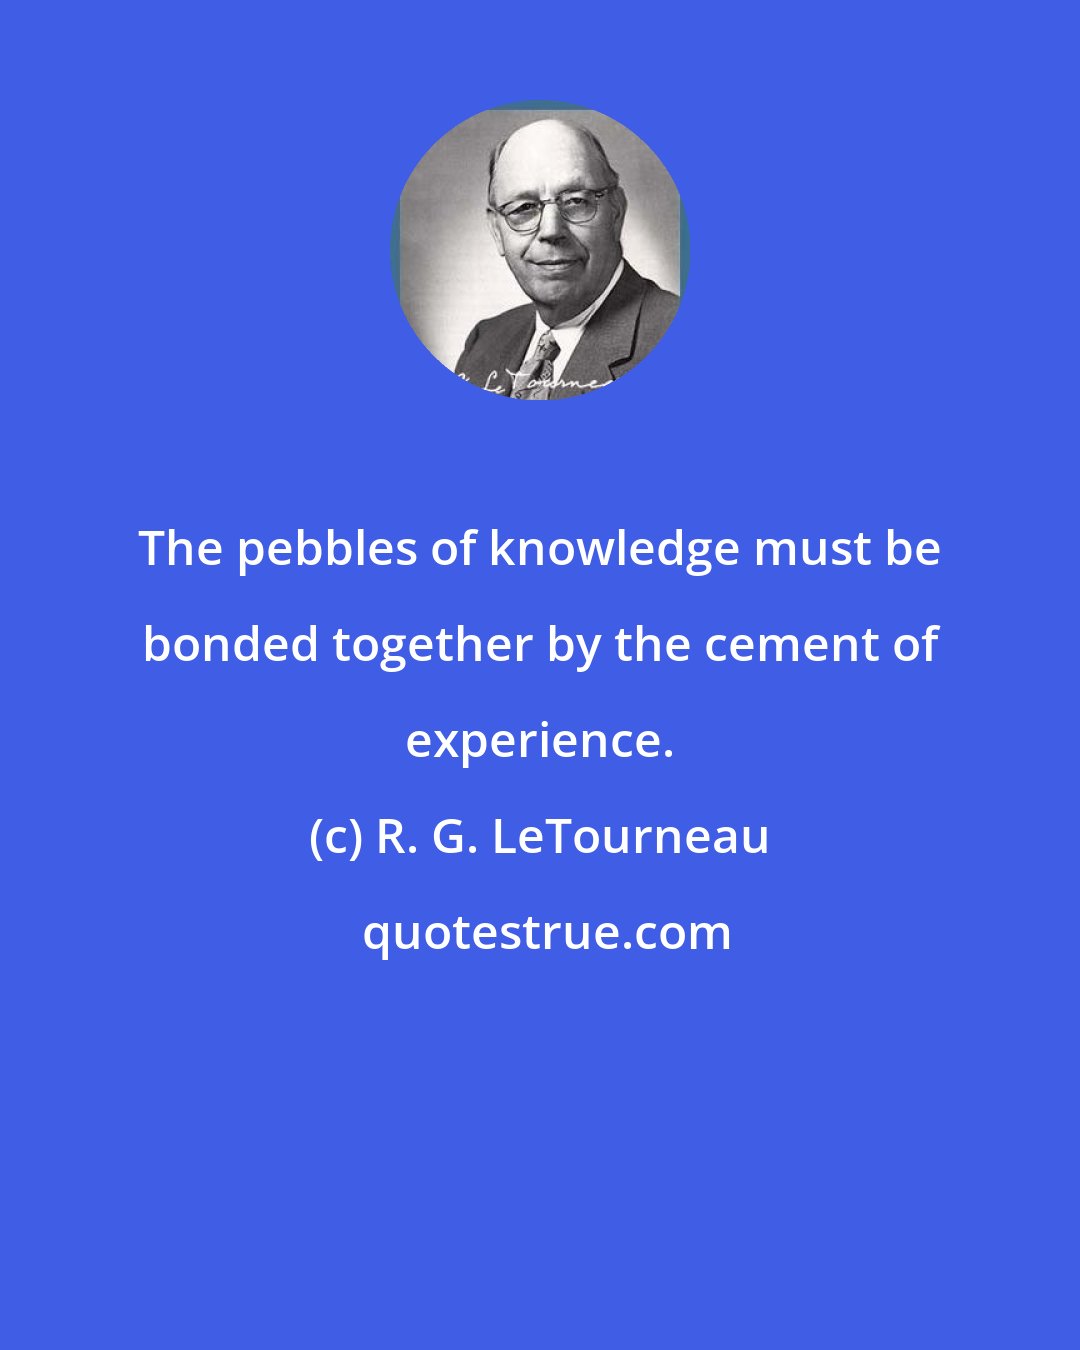 R. G. LeTourneau: The pebbles of knowledge must be bonded together by the cement of experience.